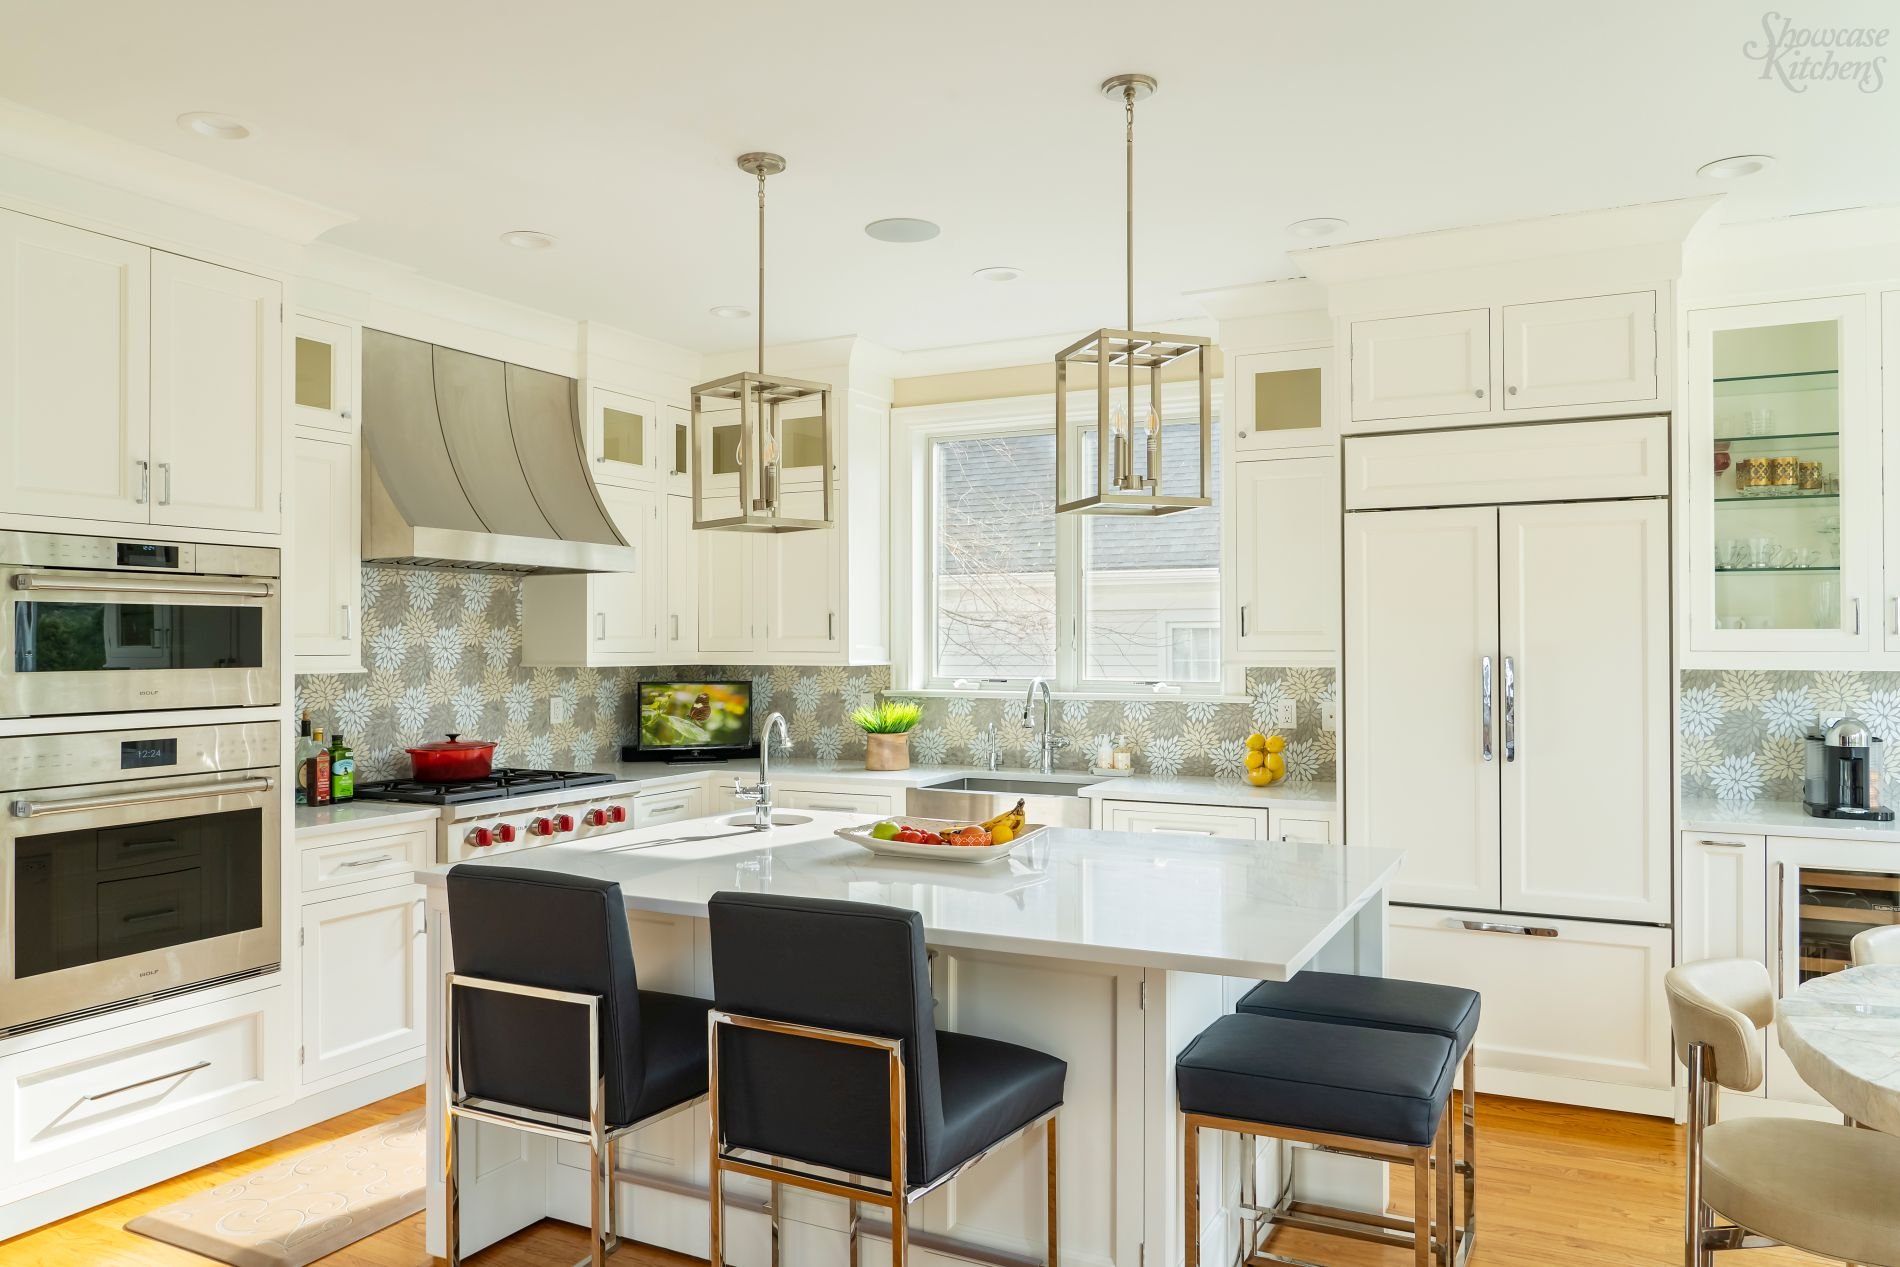 Transform Your Space: Long Island Kitchen Remodel Ideas to Inspire Your Dream Design